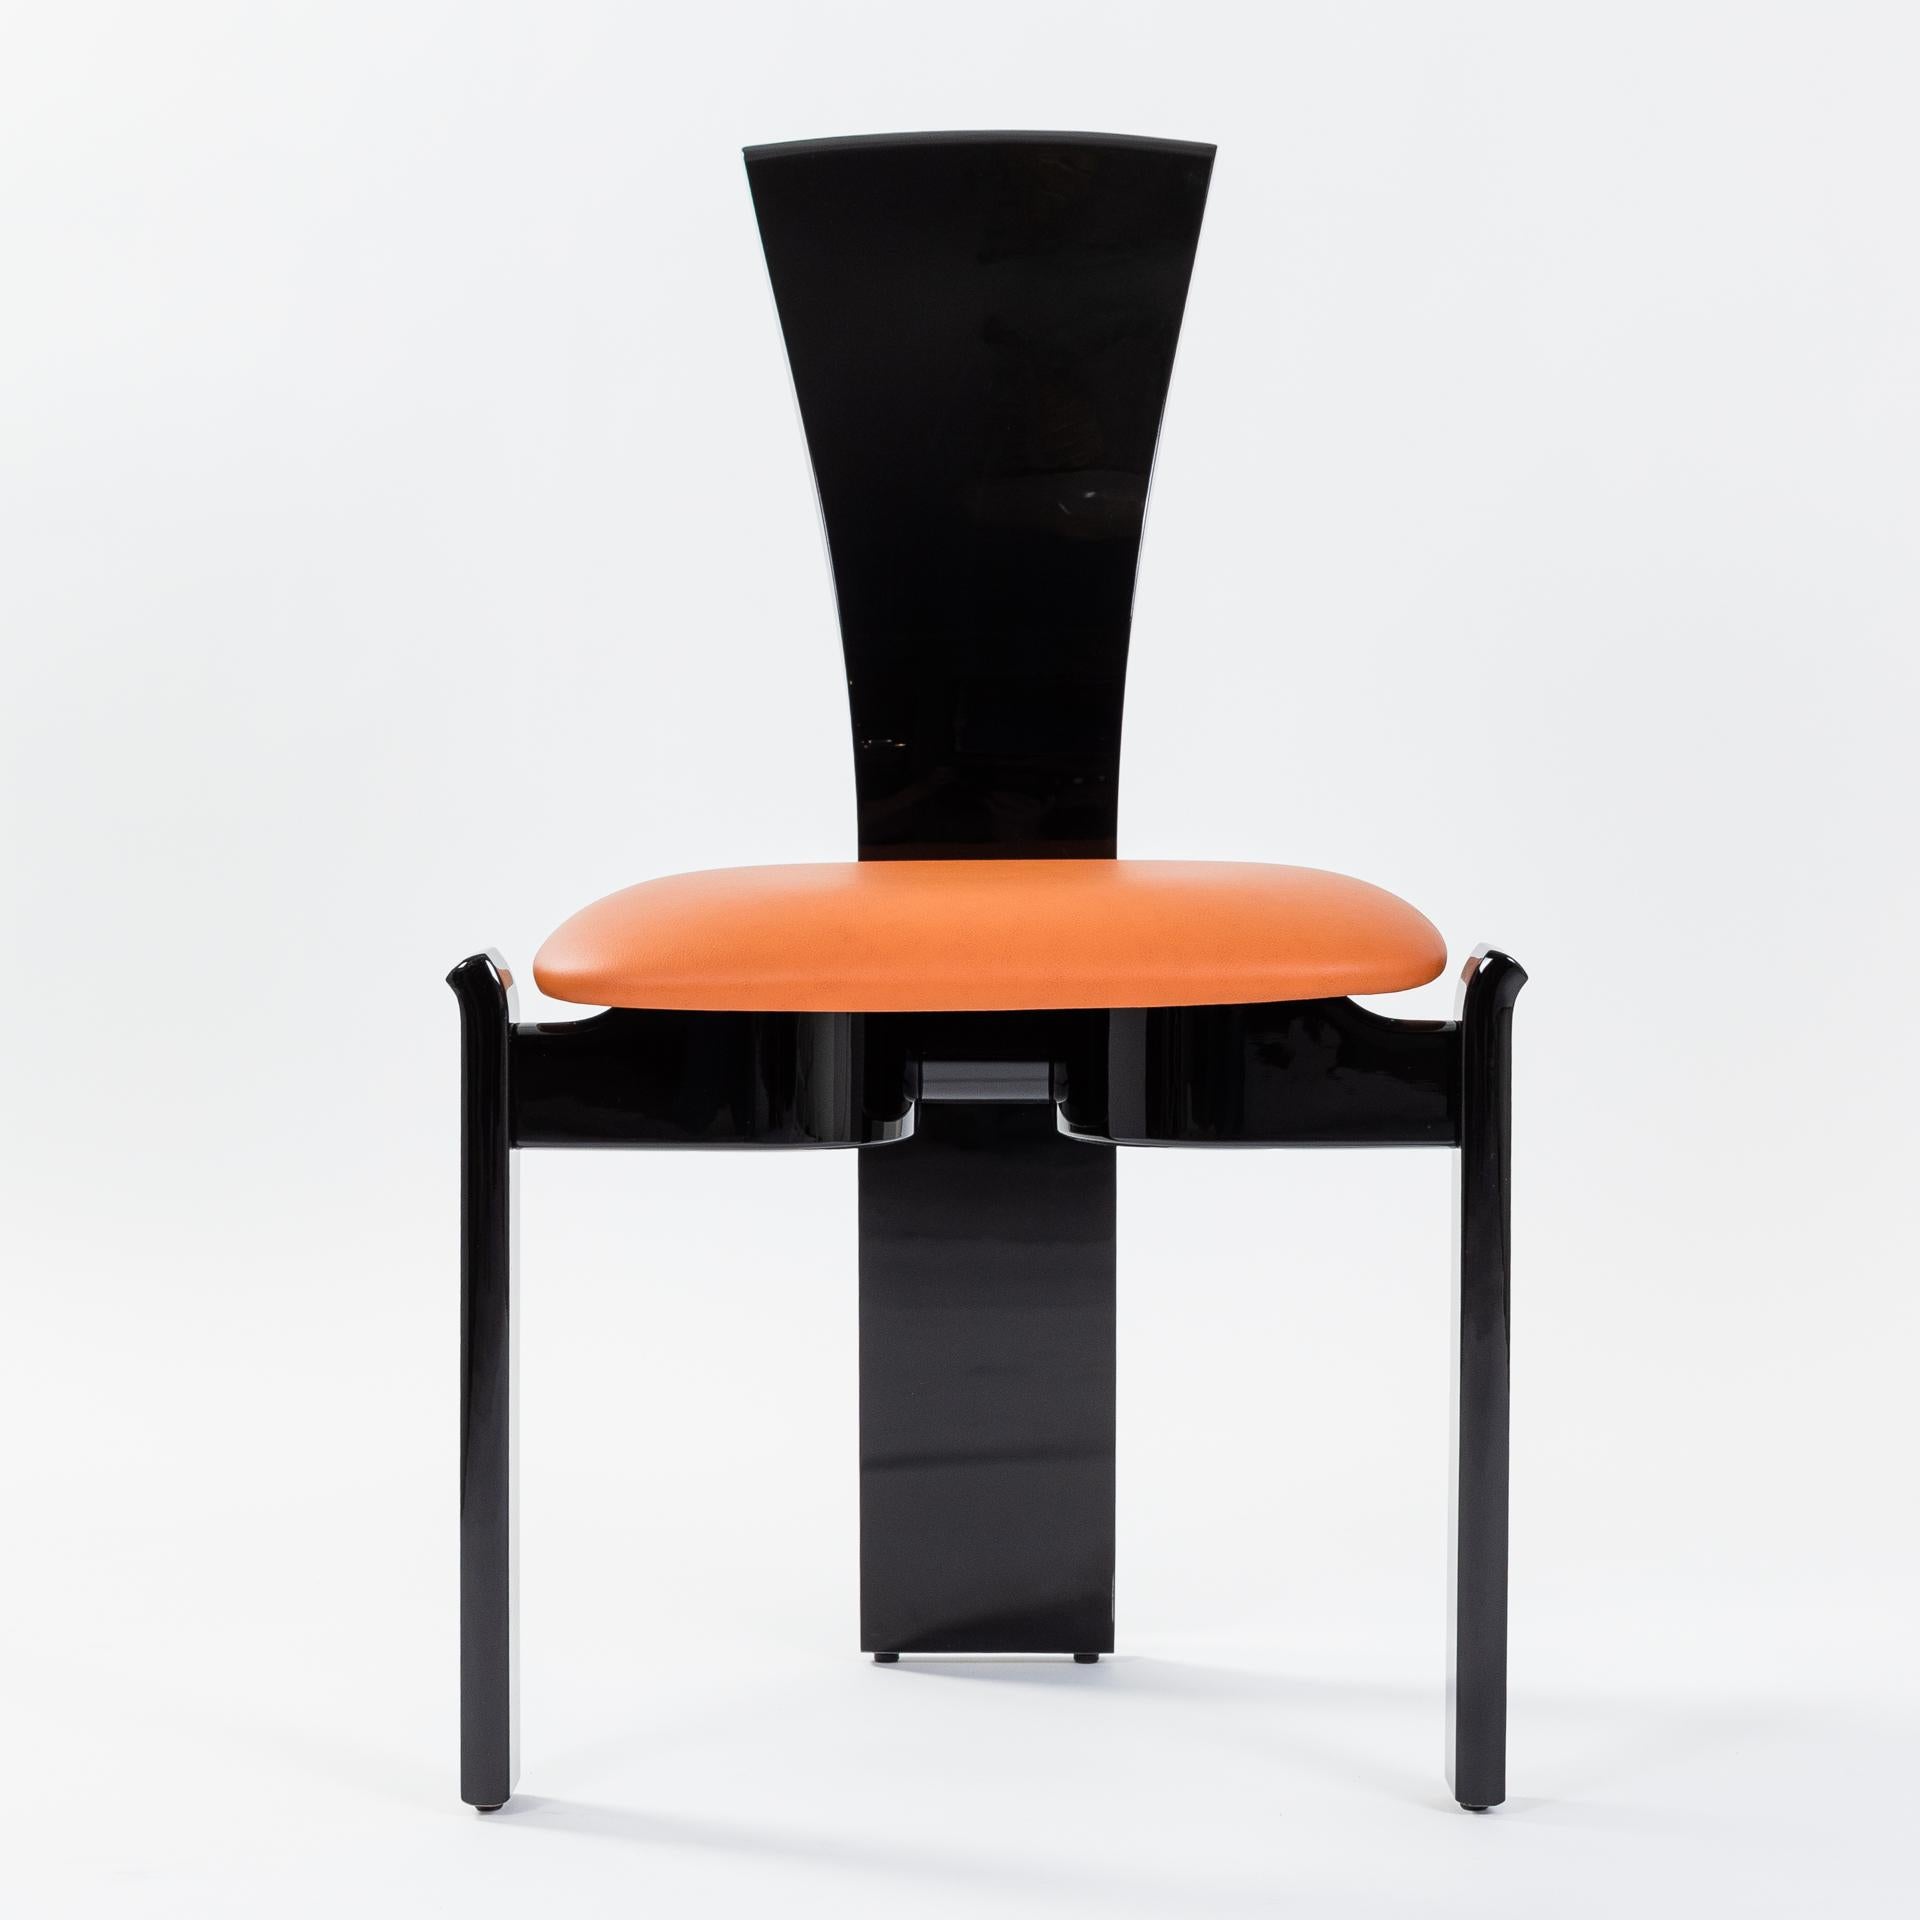 6 chairs in a fantastic, concise design and clear lines, attributed to the French architect and designer Jean Michel Wilmotte.
The tapered backrest with its ergonomic shape makes the chair extremely comfortable to sit on and reaches down to the